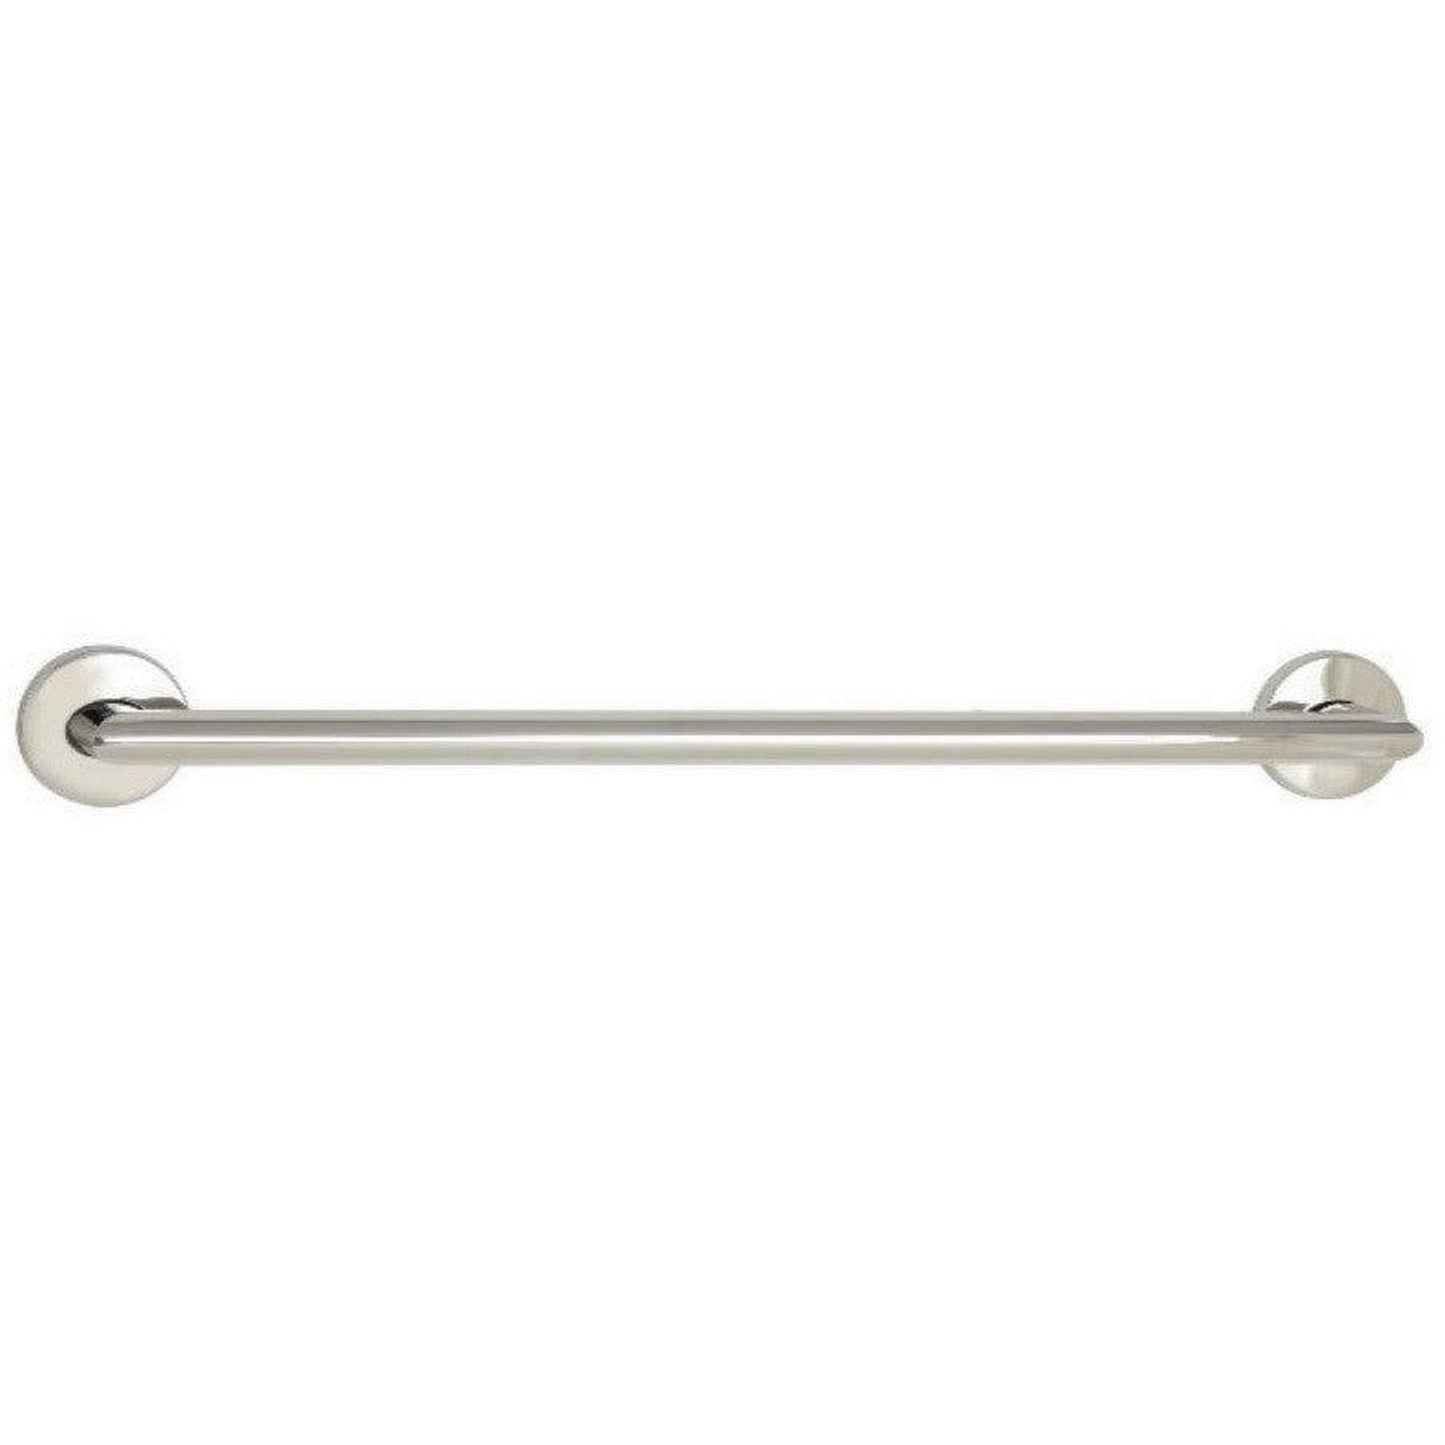 Seachrome Coronado 48" Polished Satinless Steel 1.5" Concealed Flanges Oval Grab Bar With Mitered Corners